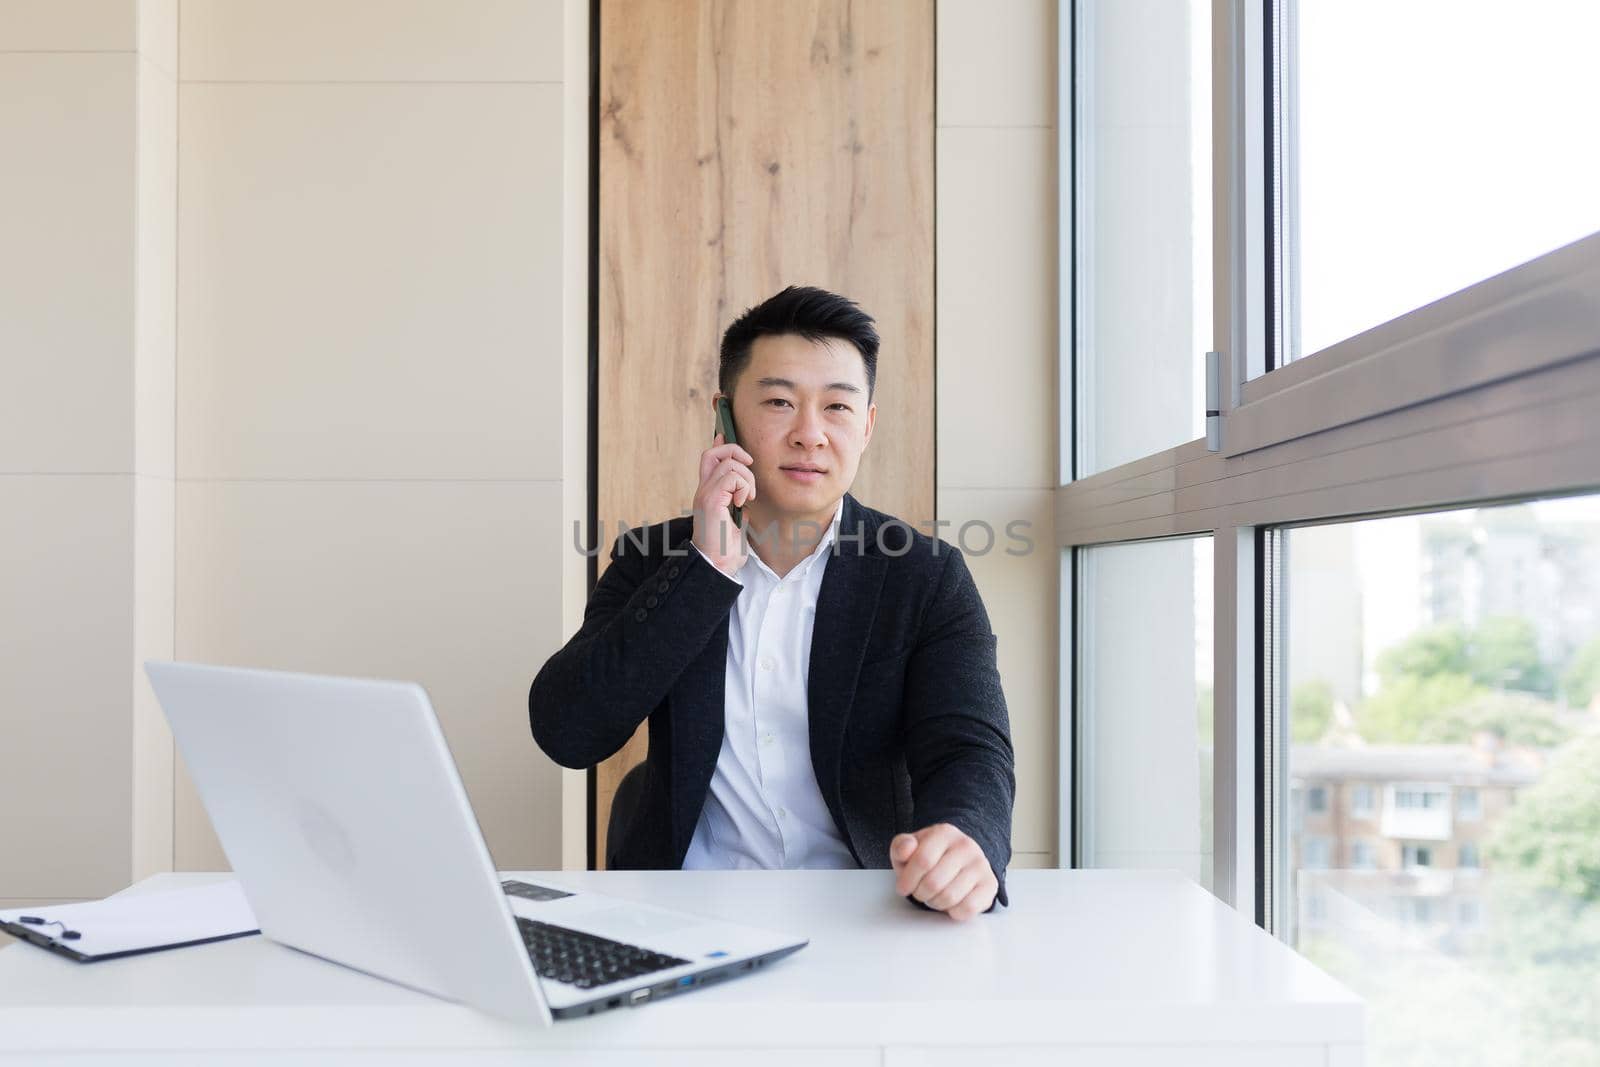 Serious asian business businessman uses cellphone to communicate with colleagues while sitting in modern office